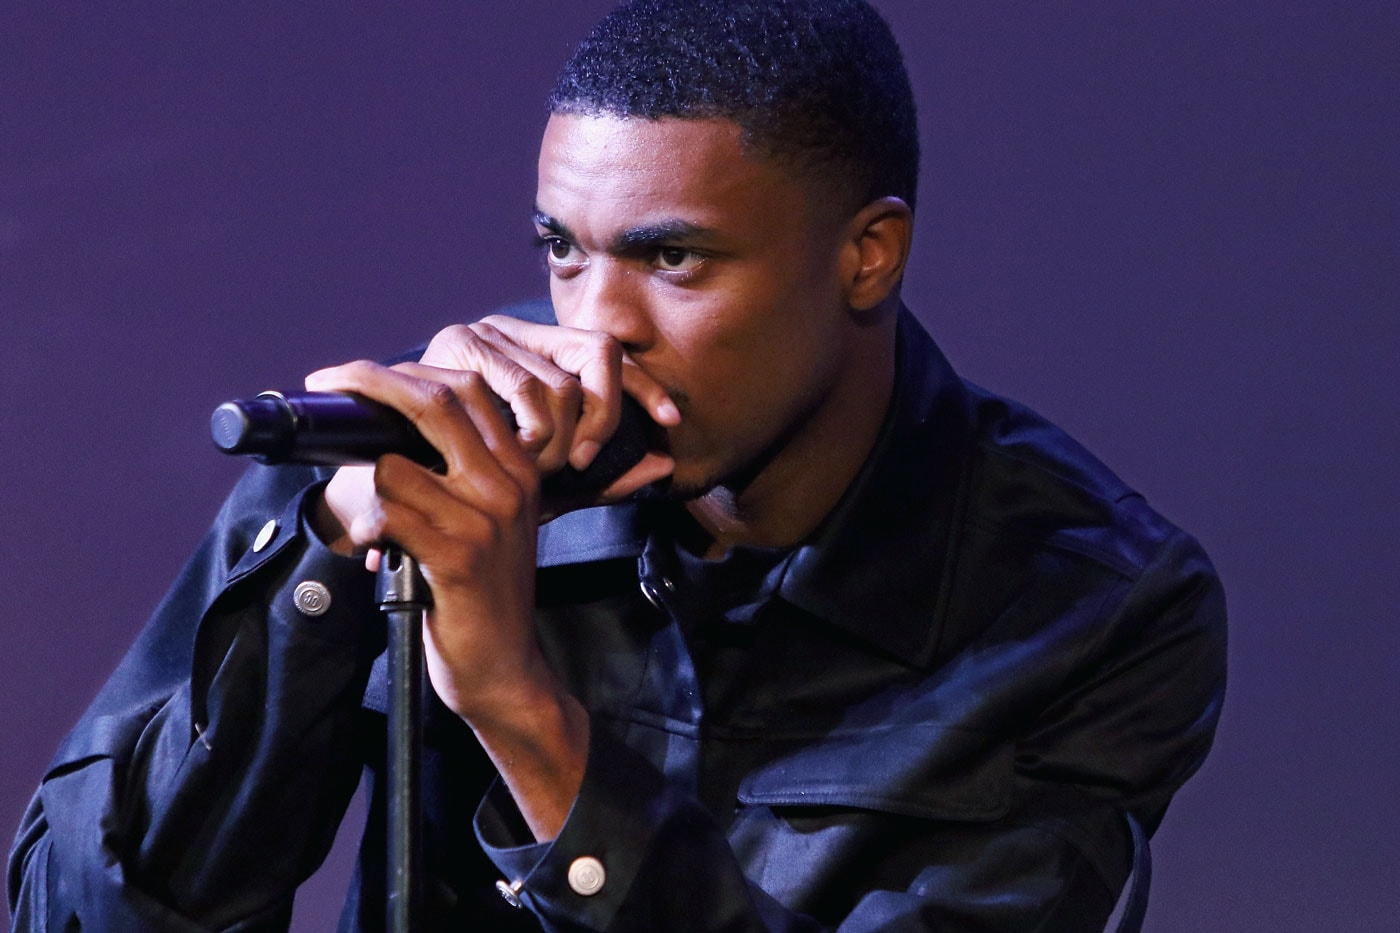 Vince Staples Shares His Thoughts on Ghostwriting, Miley Cyrus and More